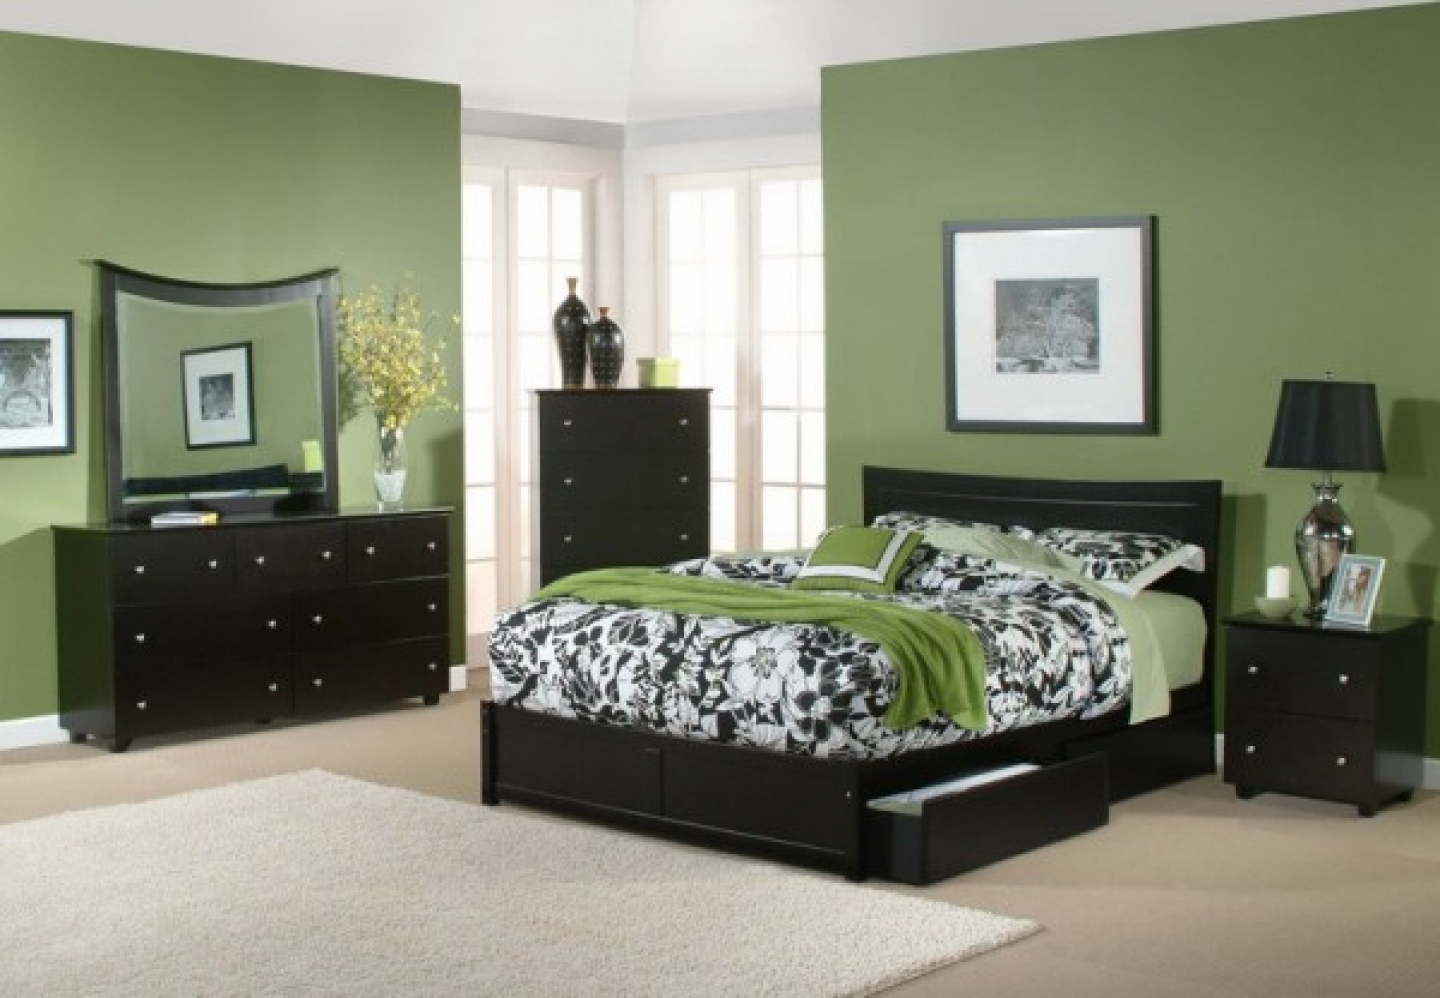 Choosing an interior color for bedroom